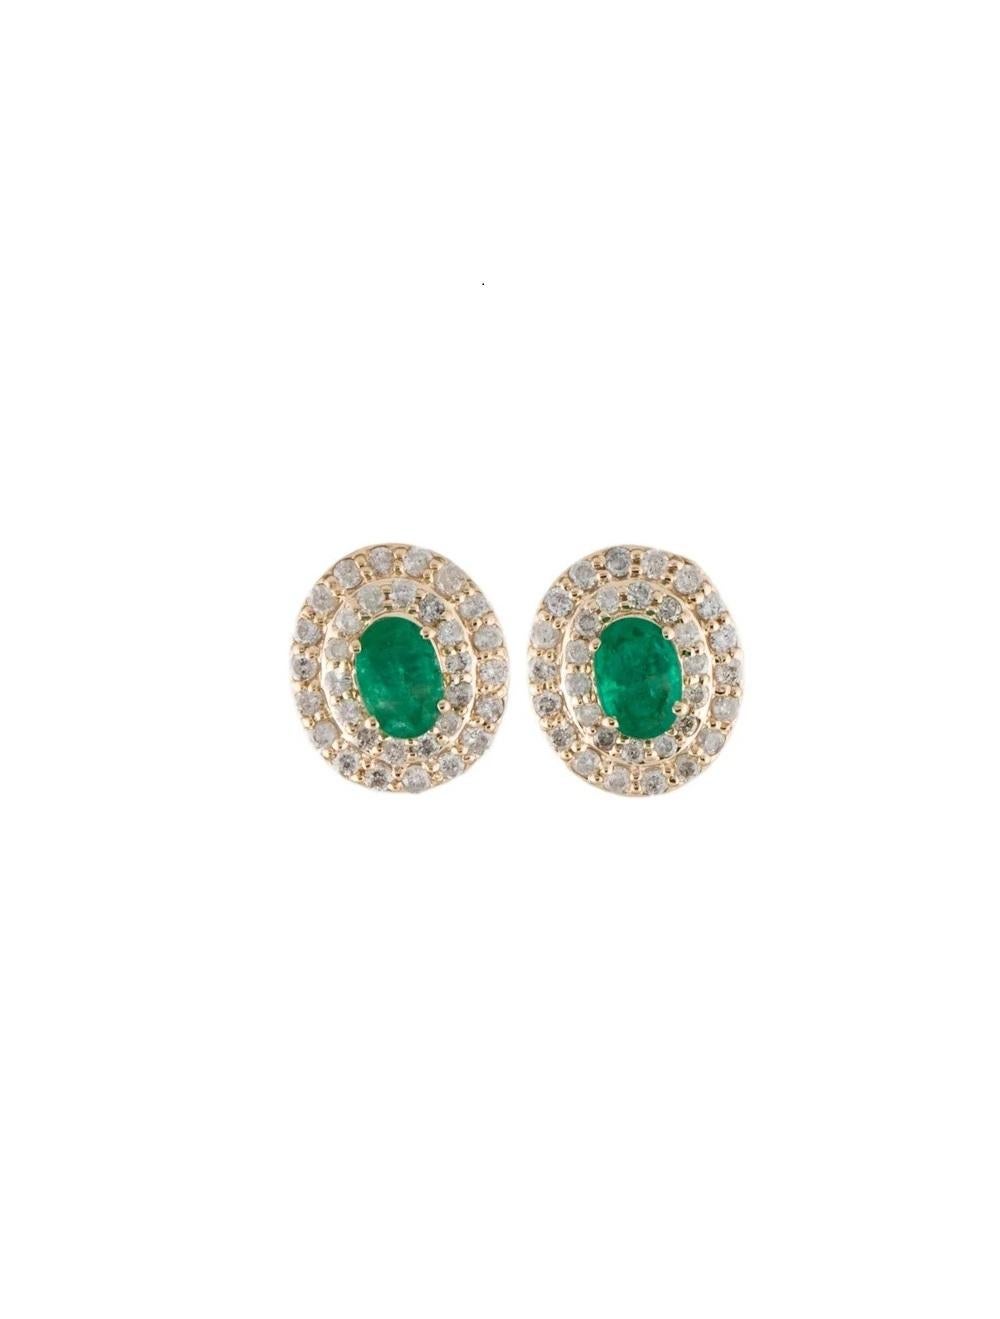 14K Emerald & Diamond Stud Earrings  Timeless Elegance in Yellow Gold In New Condition For Sale In Holtsville, NY